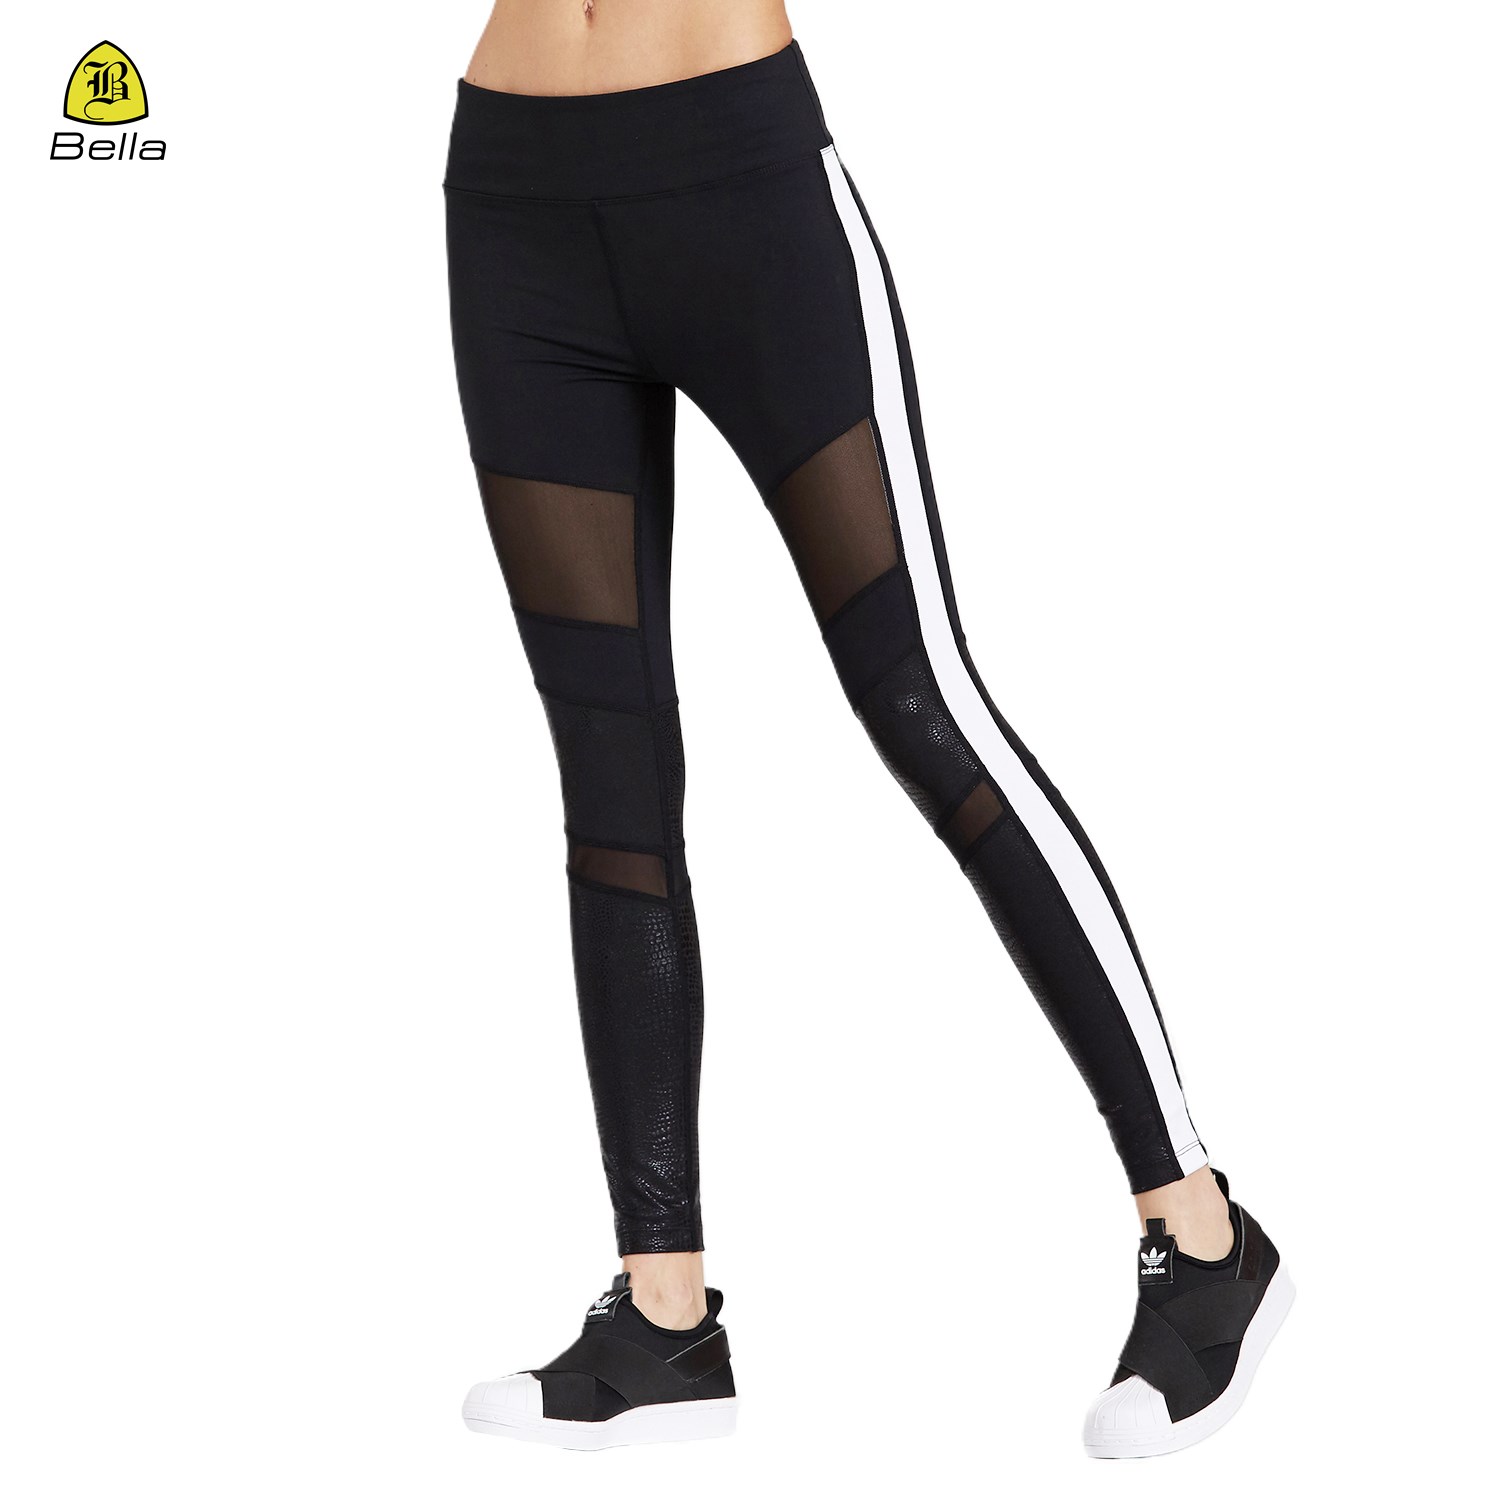 Fitness-Leggings mit hoher Taille